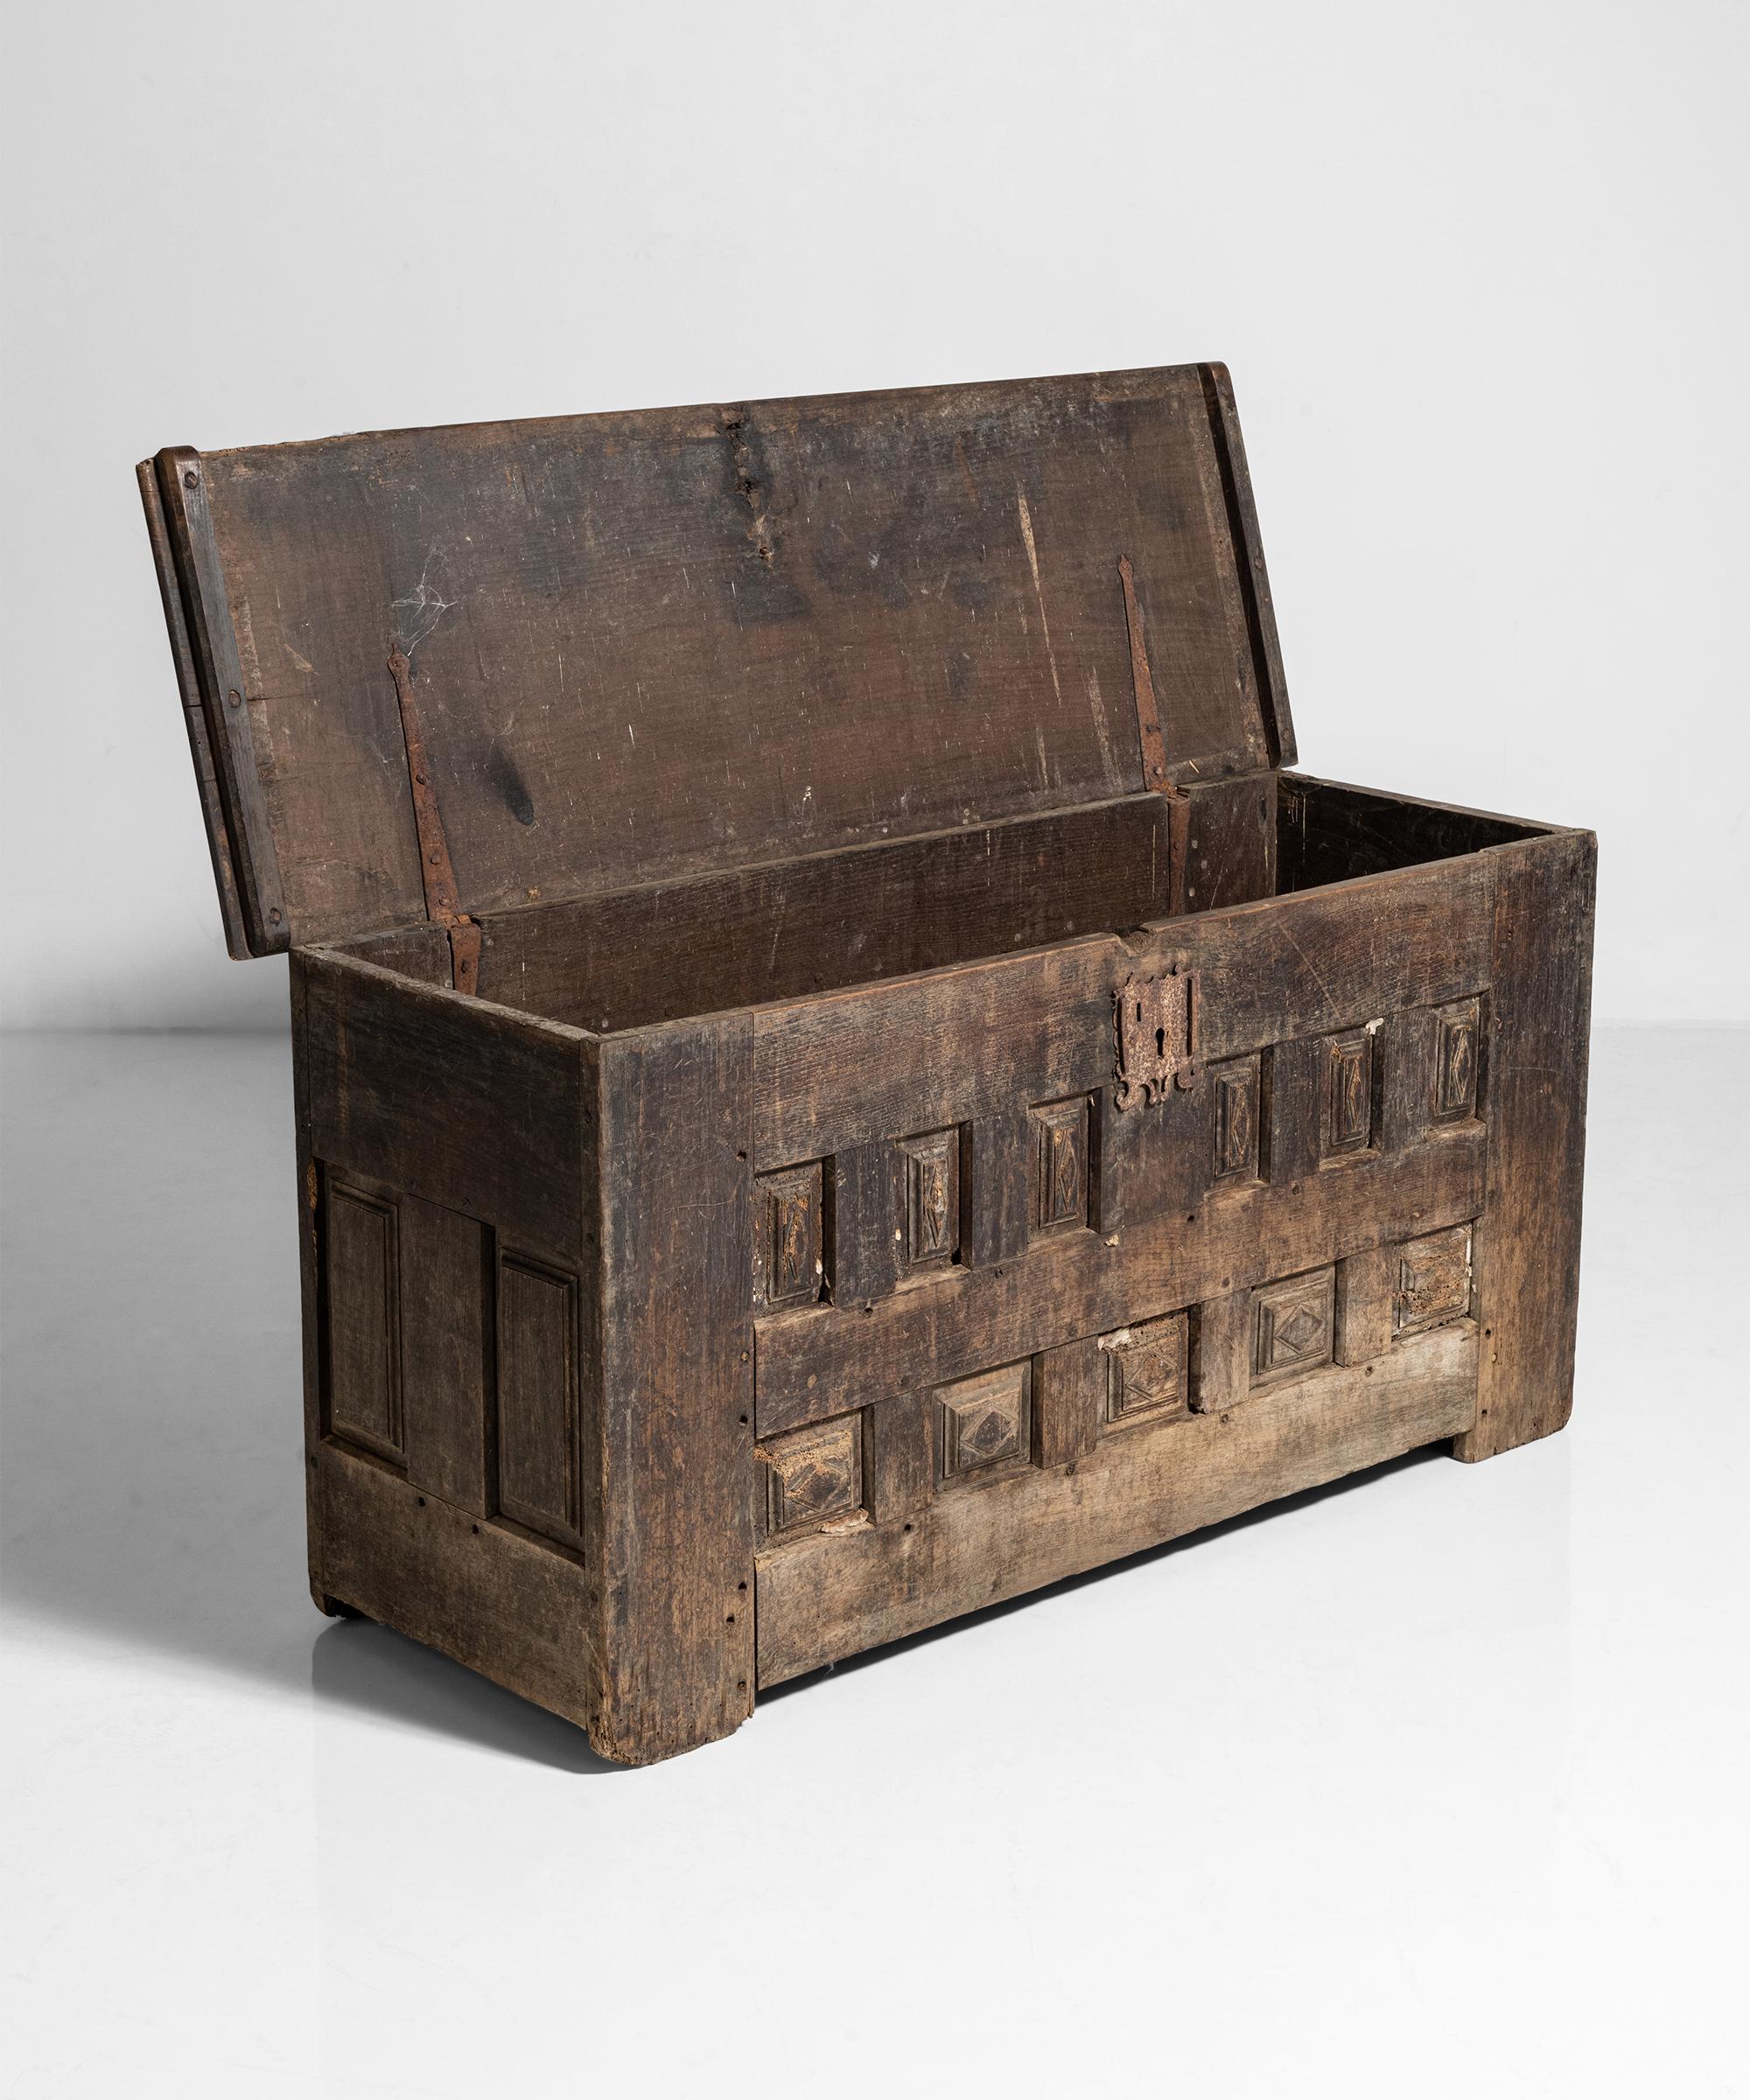 Pyrenees Coffer

Spain Circa 1700

Beautifully worn chest constructed in Chestnut Wood.

Measures: 71.5